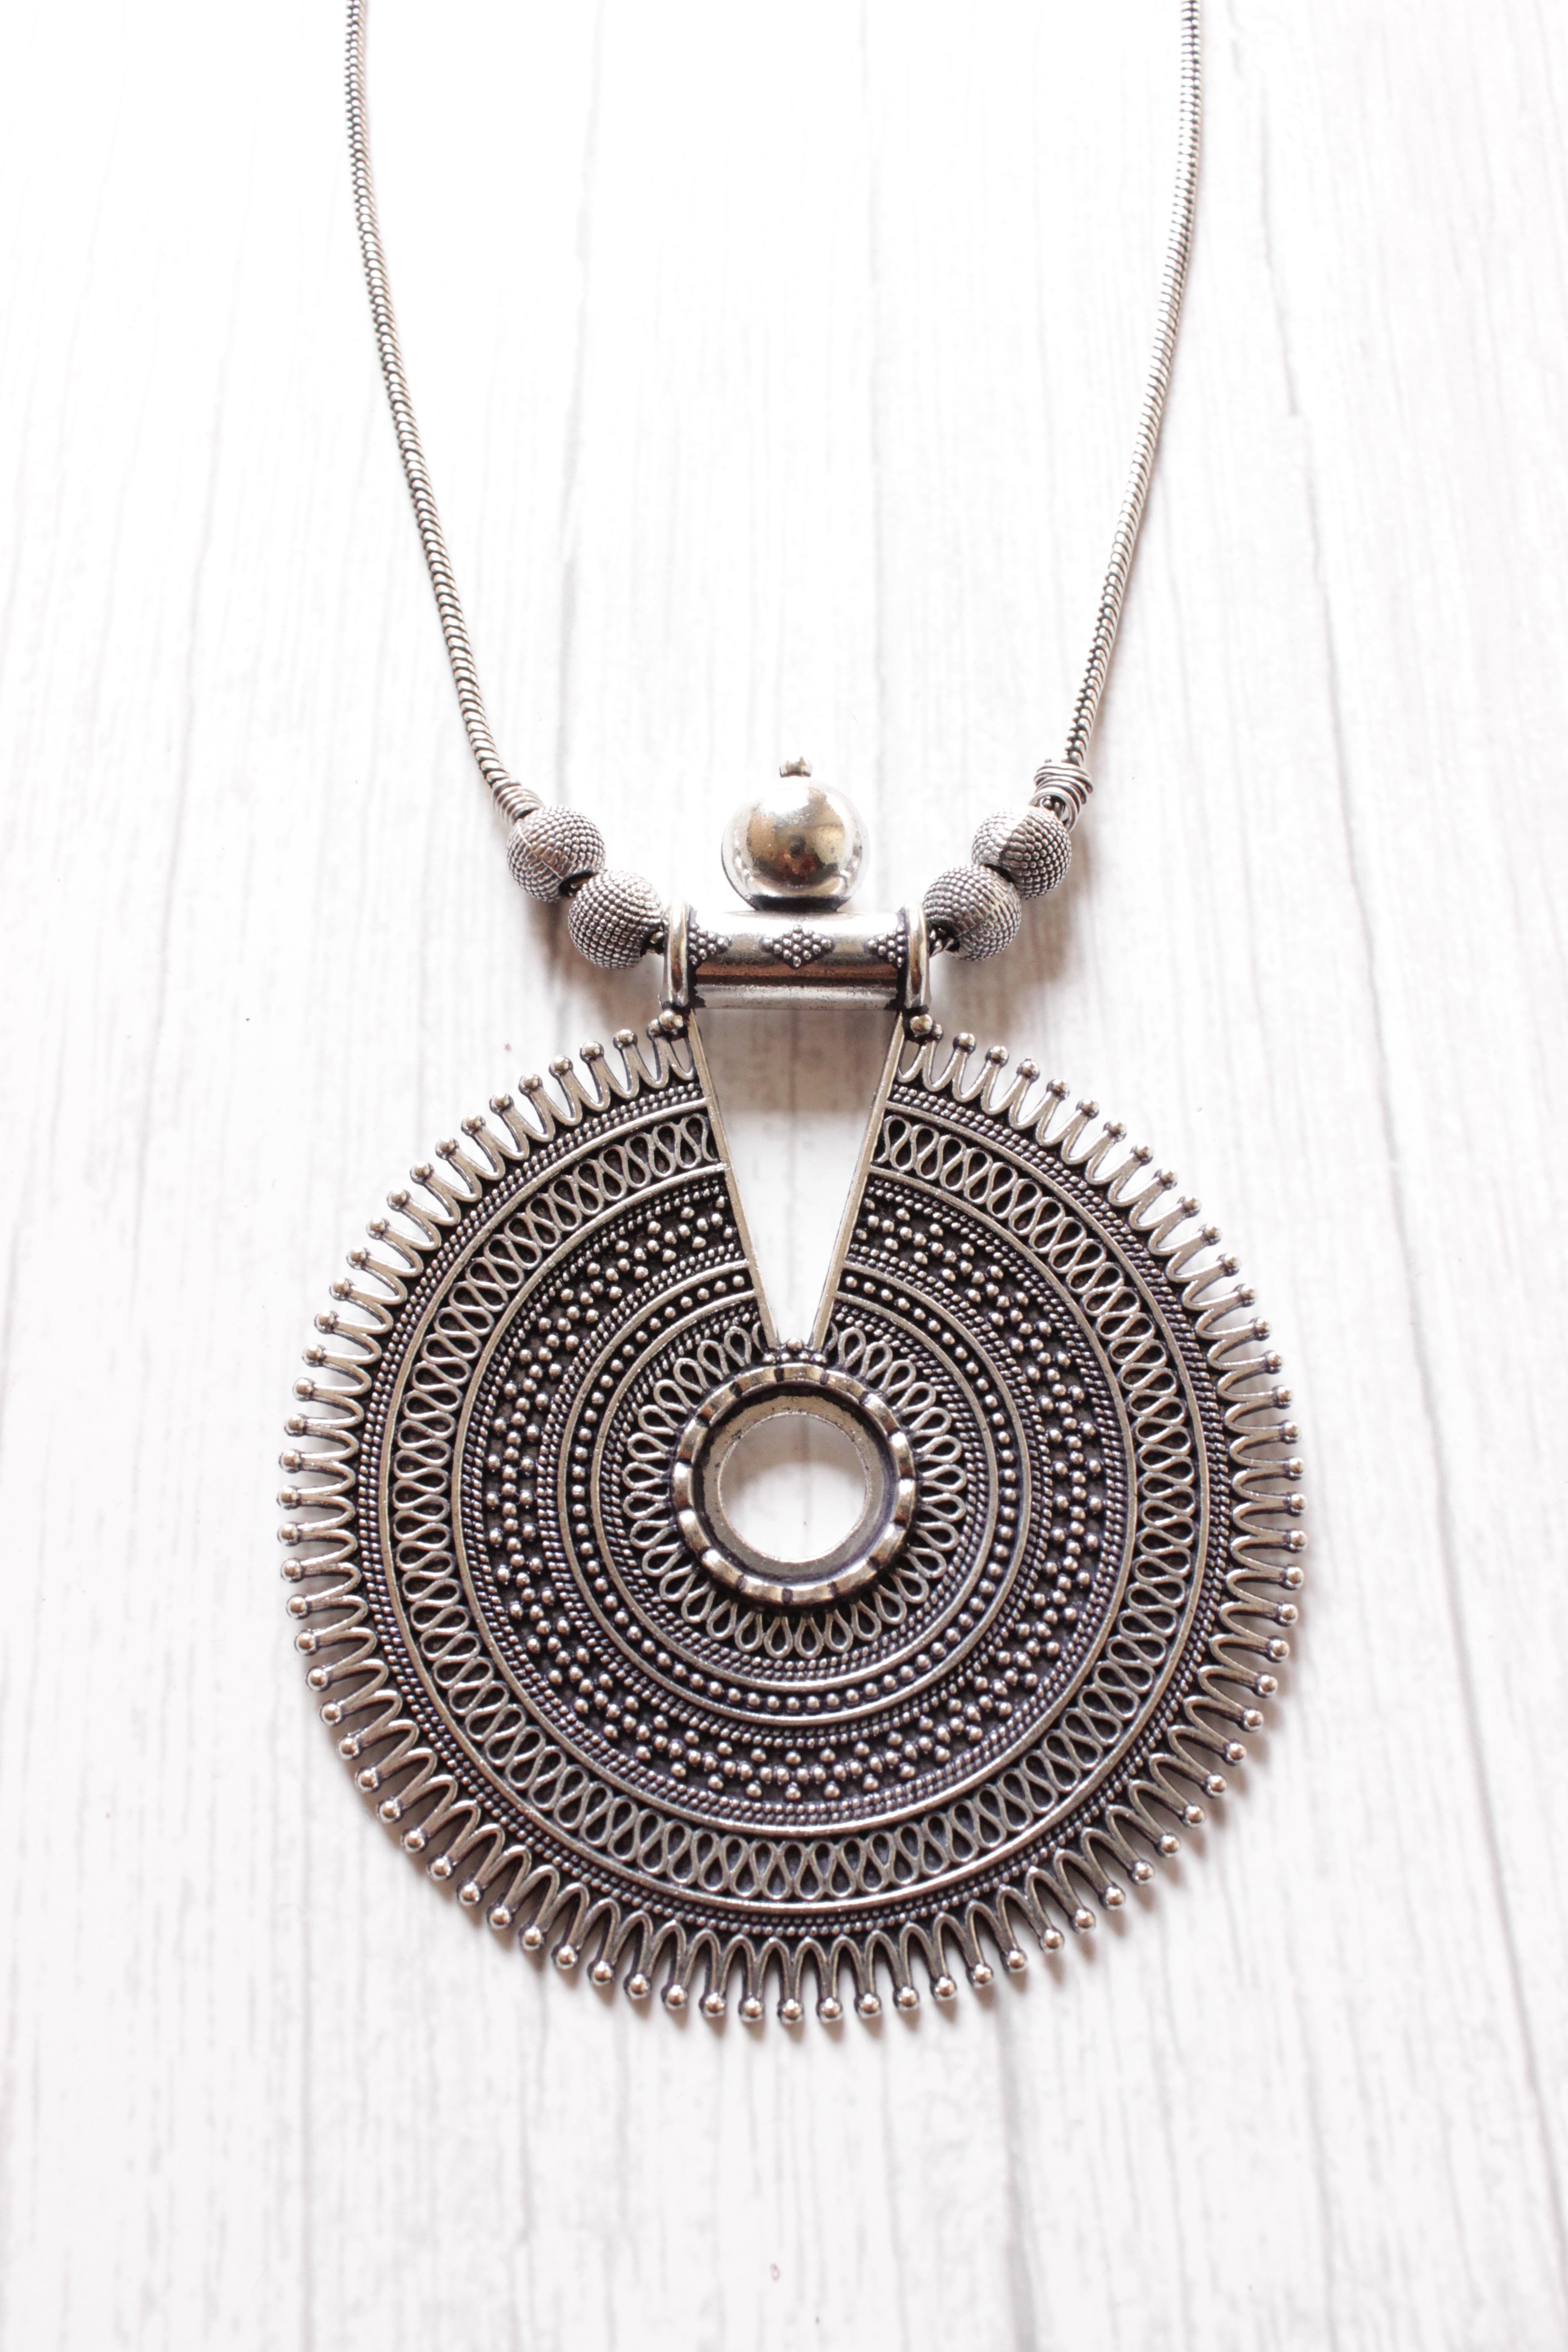 Concentric Circles Statement Pendant Silver Finish Baroque Necklace